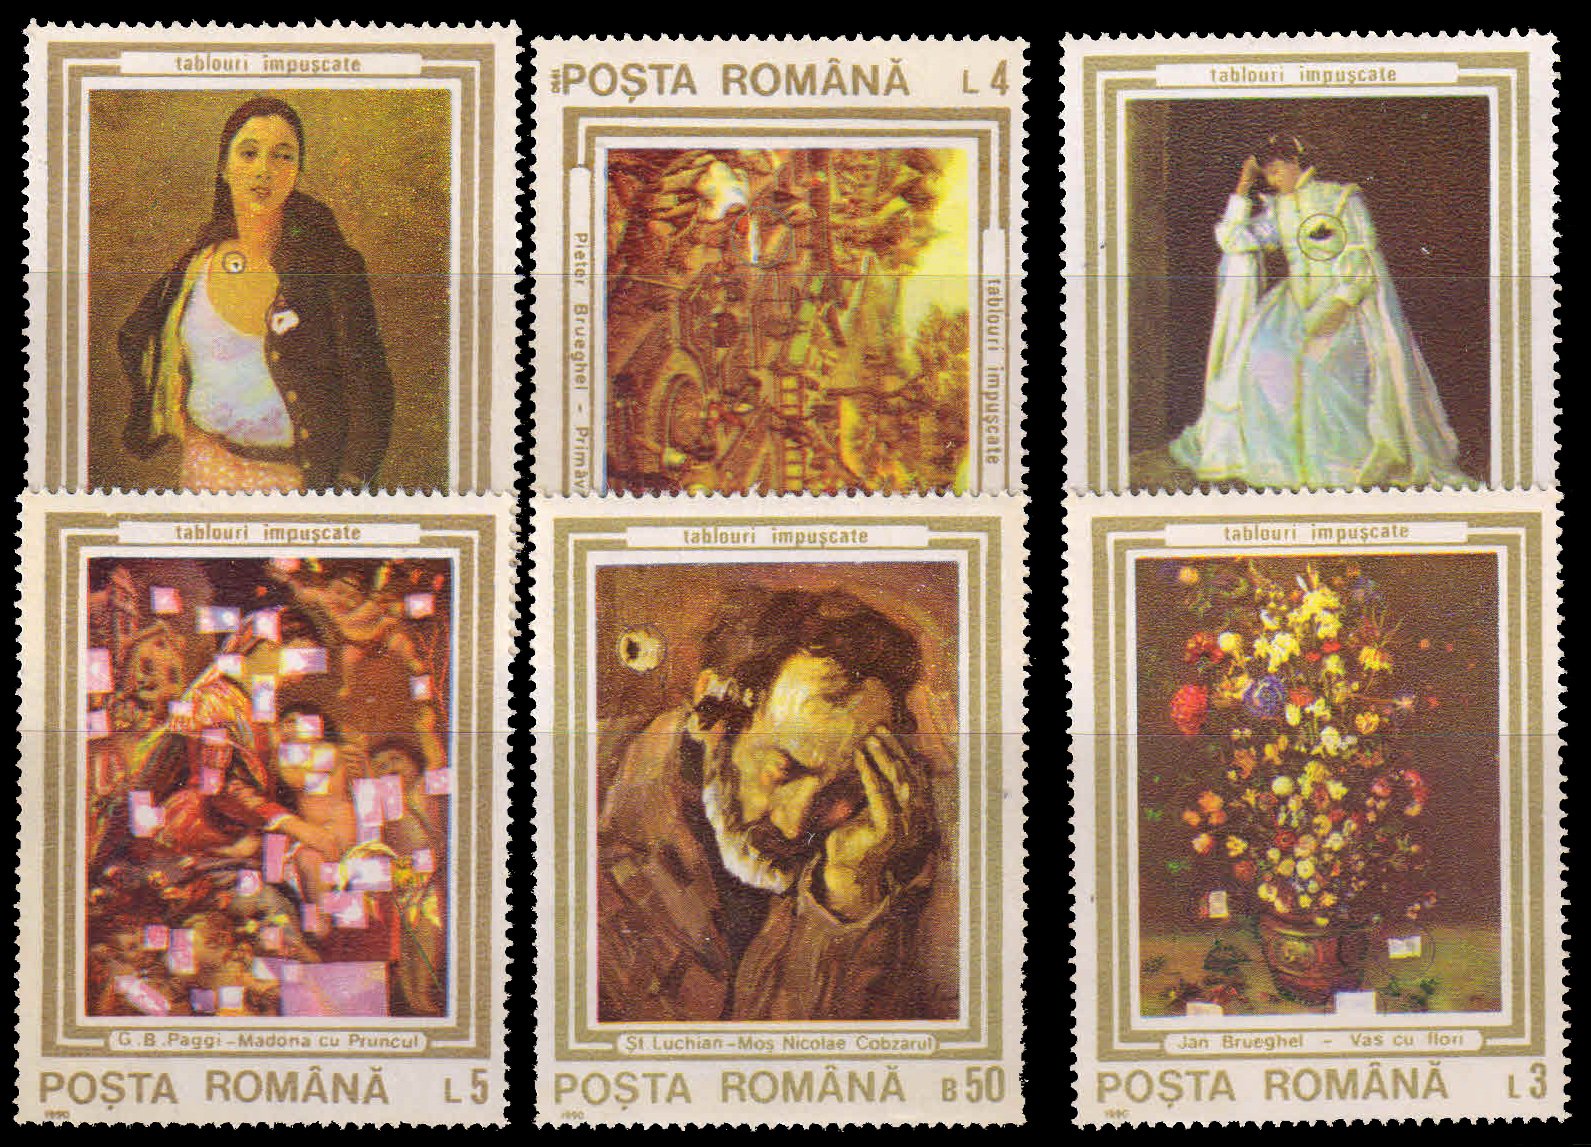 ROMANIA 1990-Paintings Damaged During the Uprising, Set of 6, MNH, S.G. 5303-08